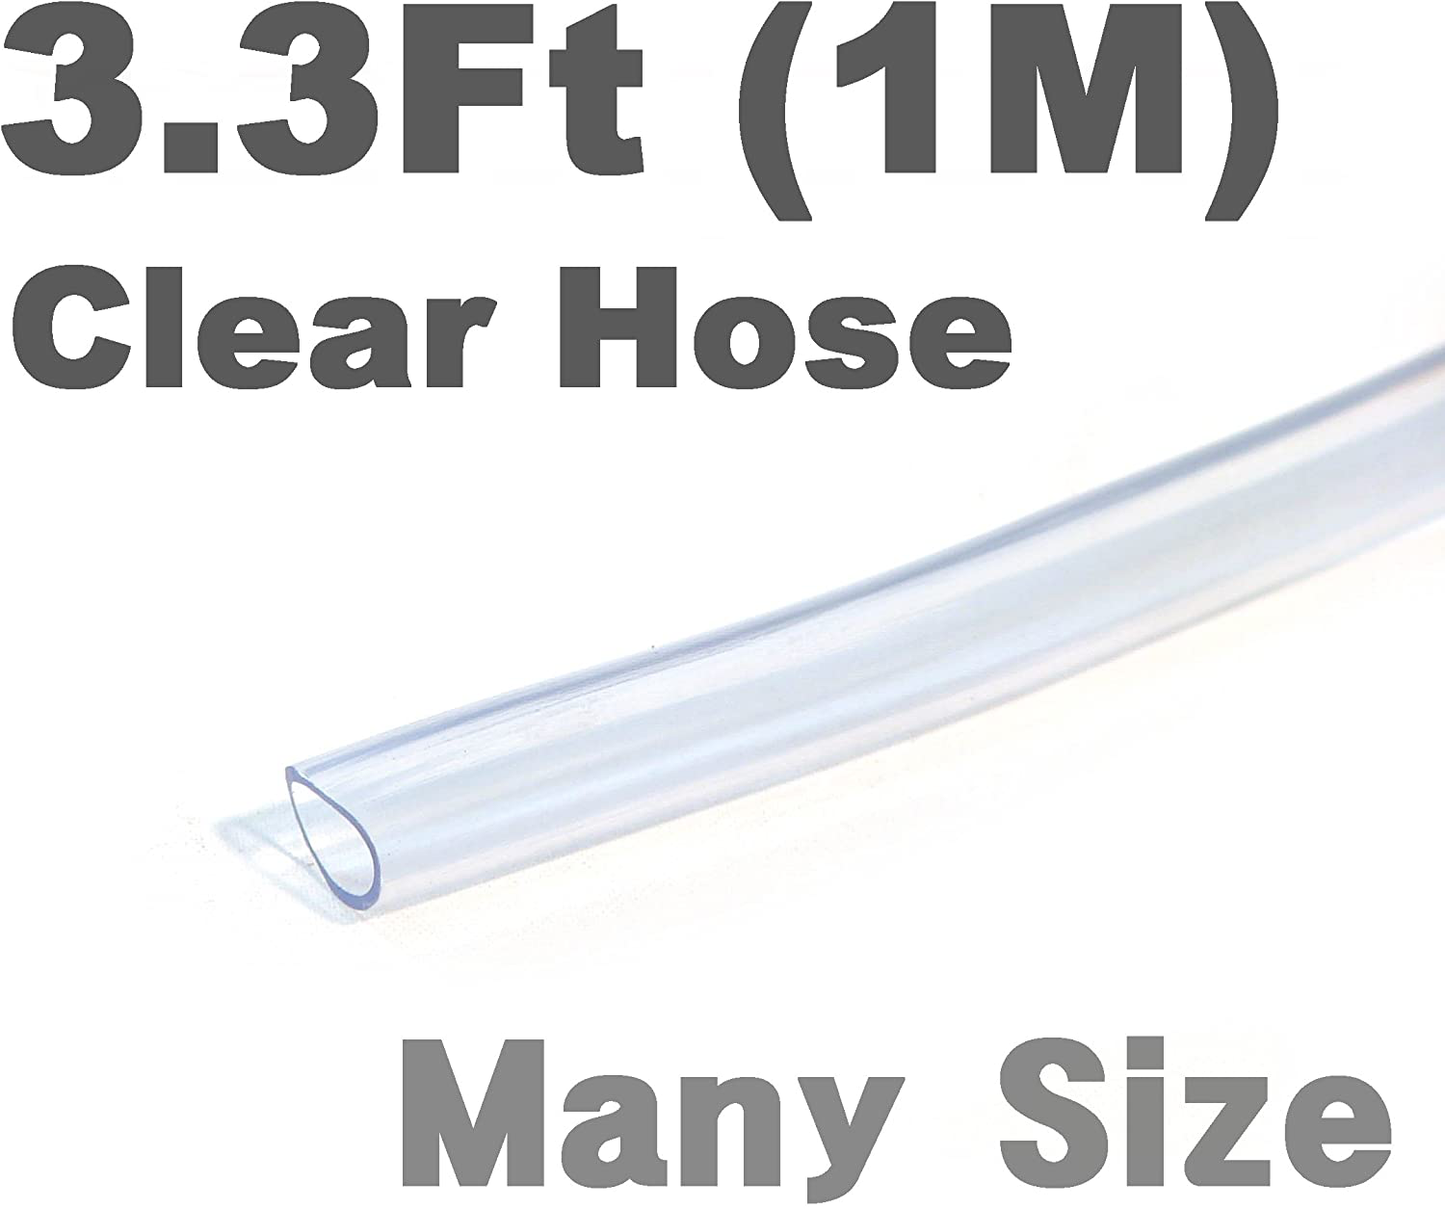 SMI Inner 1/4" Outer 5/16" 3.3 Ft 1 Metre PVC Clear Tubing Flexible Air Food Water Delivery Feeding Hose Garden Pond Aquarium Animals & Pet Supplies > Pet Supplies > Fish Supplies > Aquarium & Pond Tubing SMI   